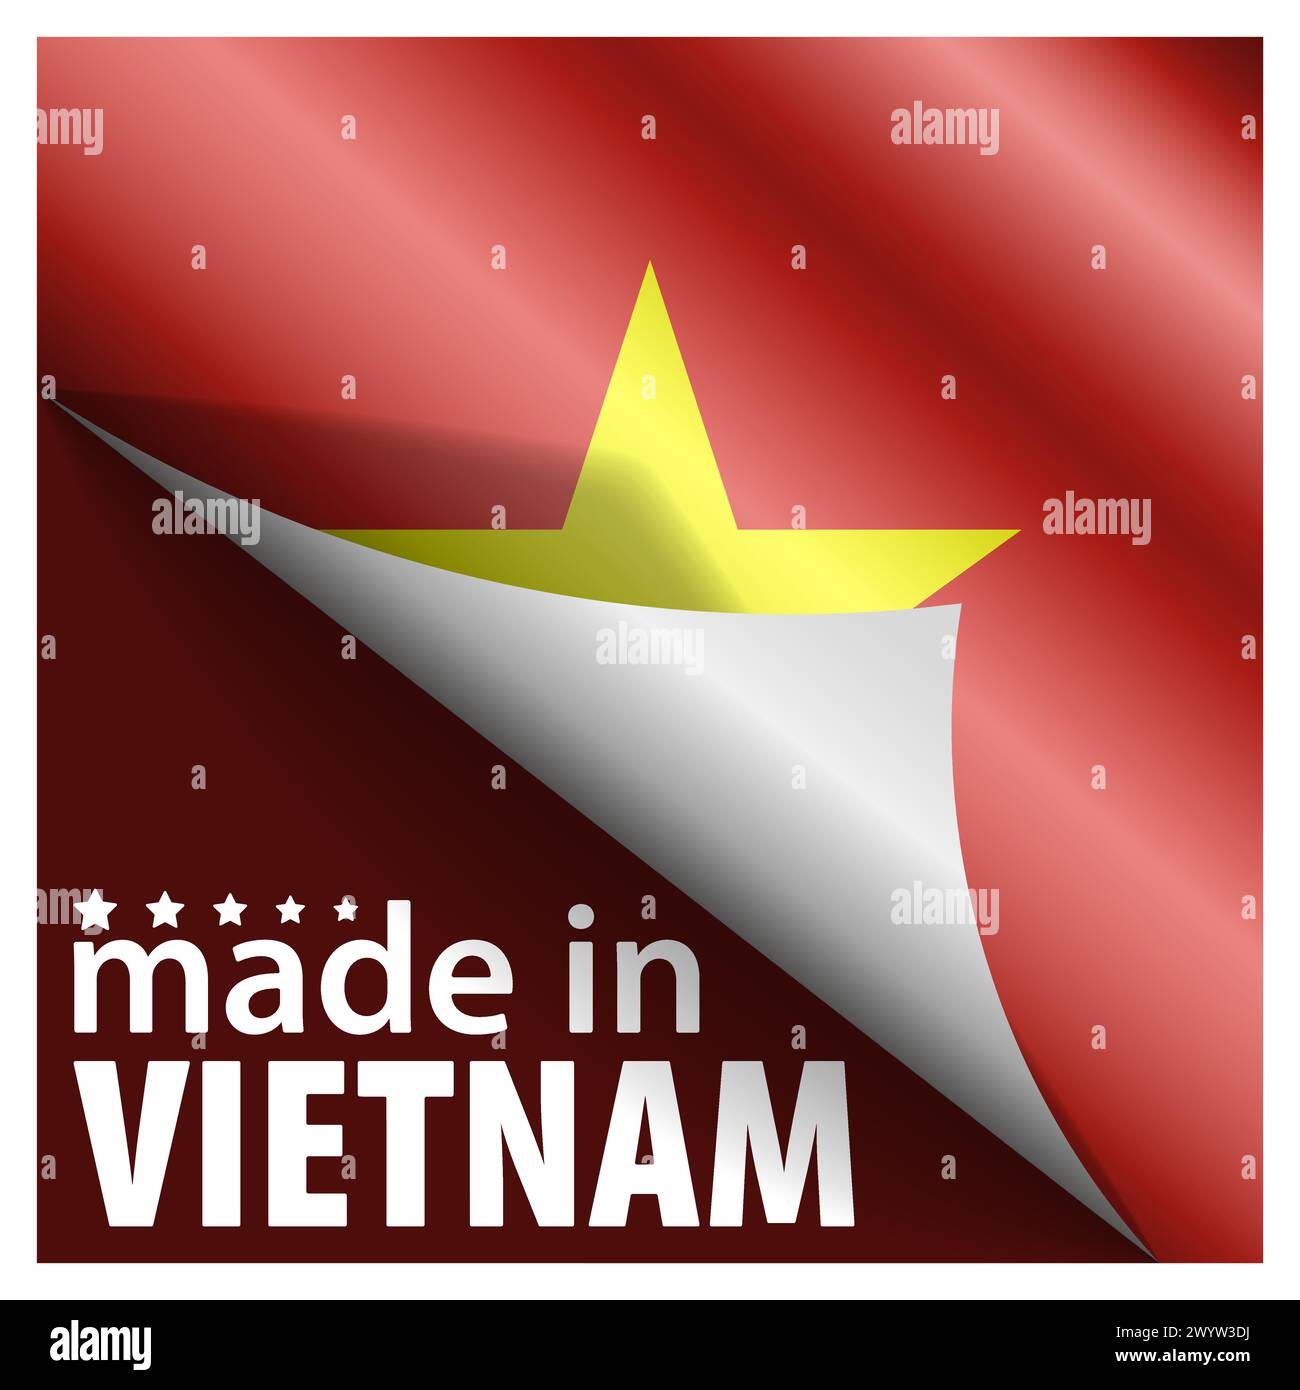 Made in Vietnam graphic and label. Element of impact for the use you want to make of it. Stock Vector